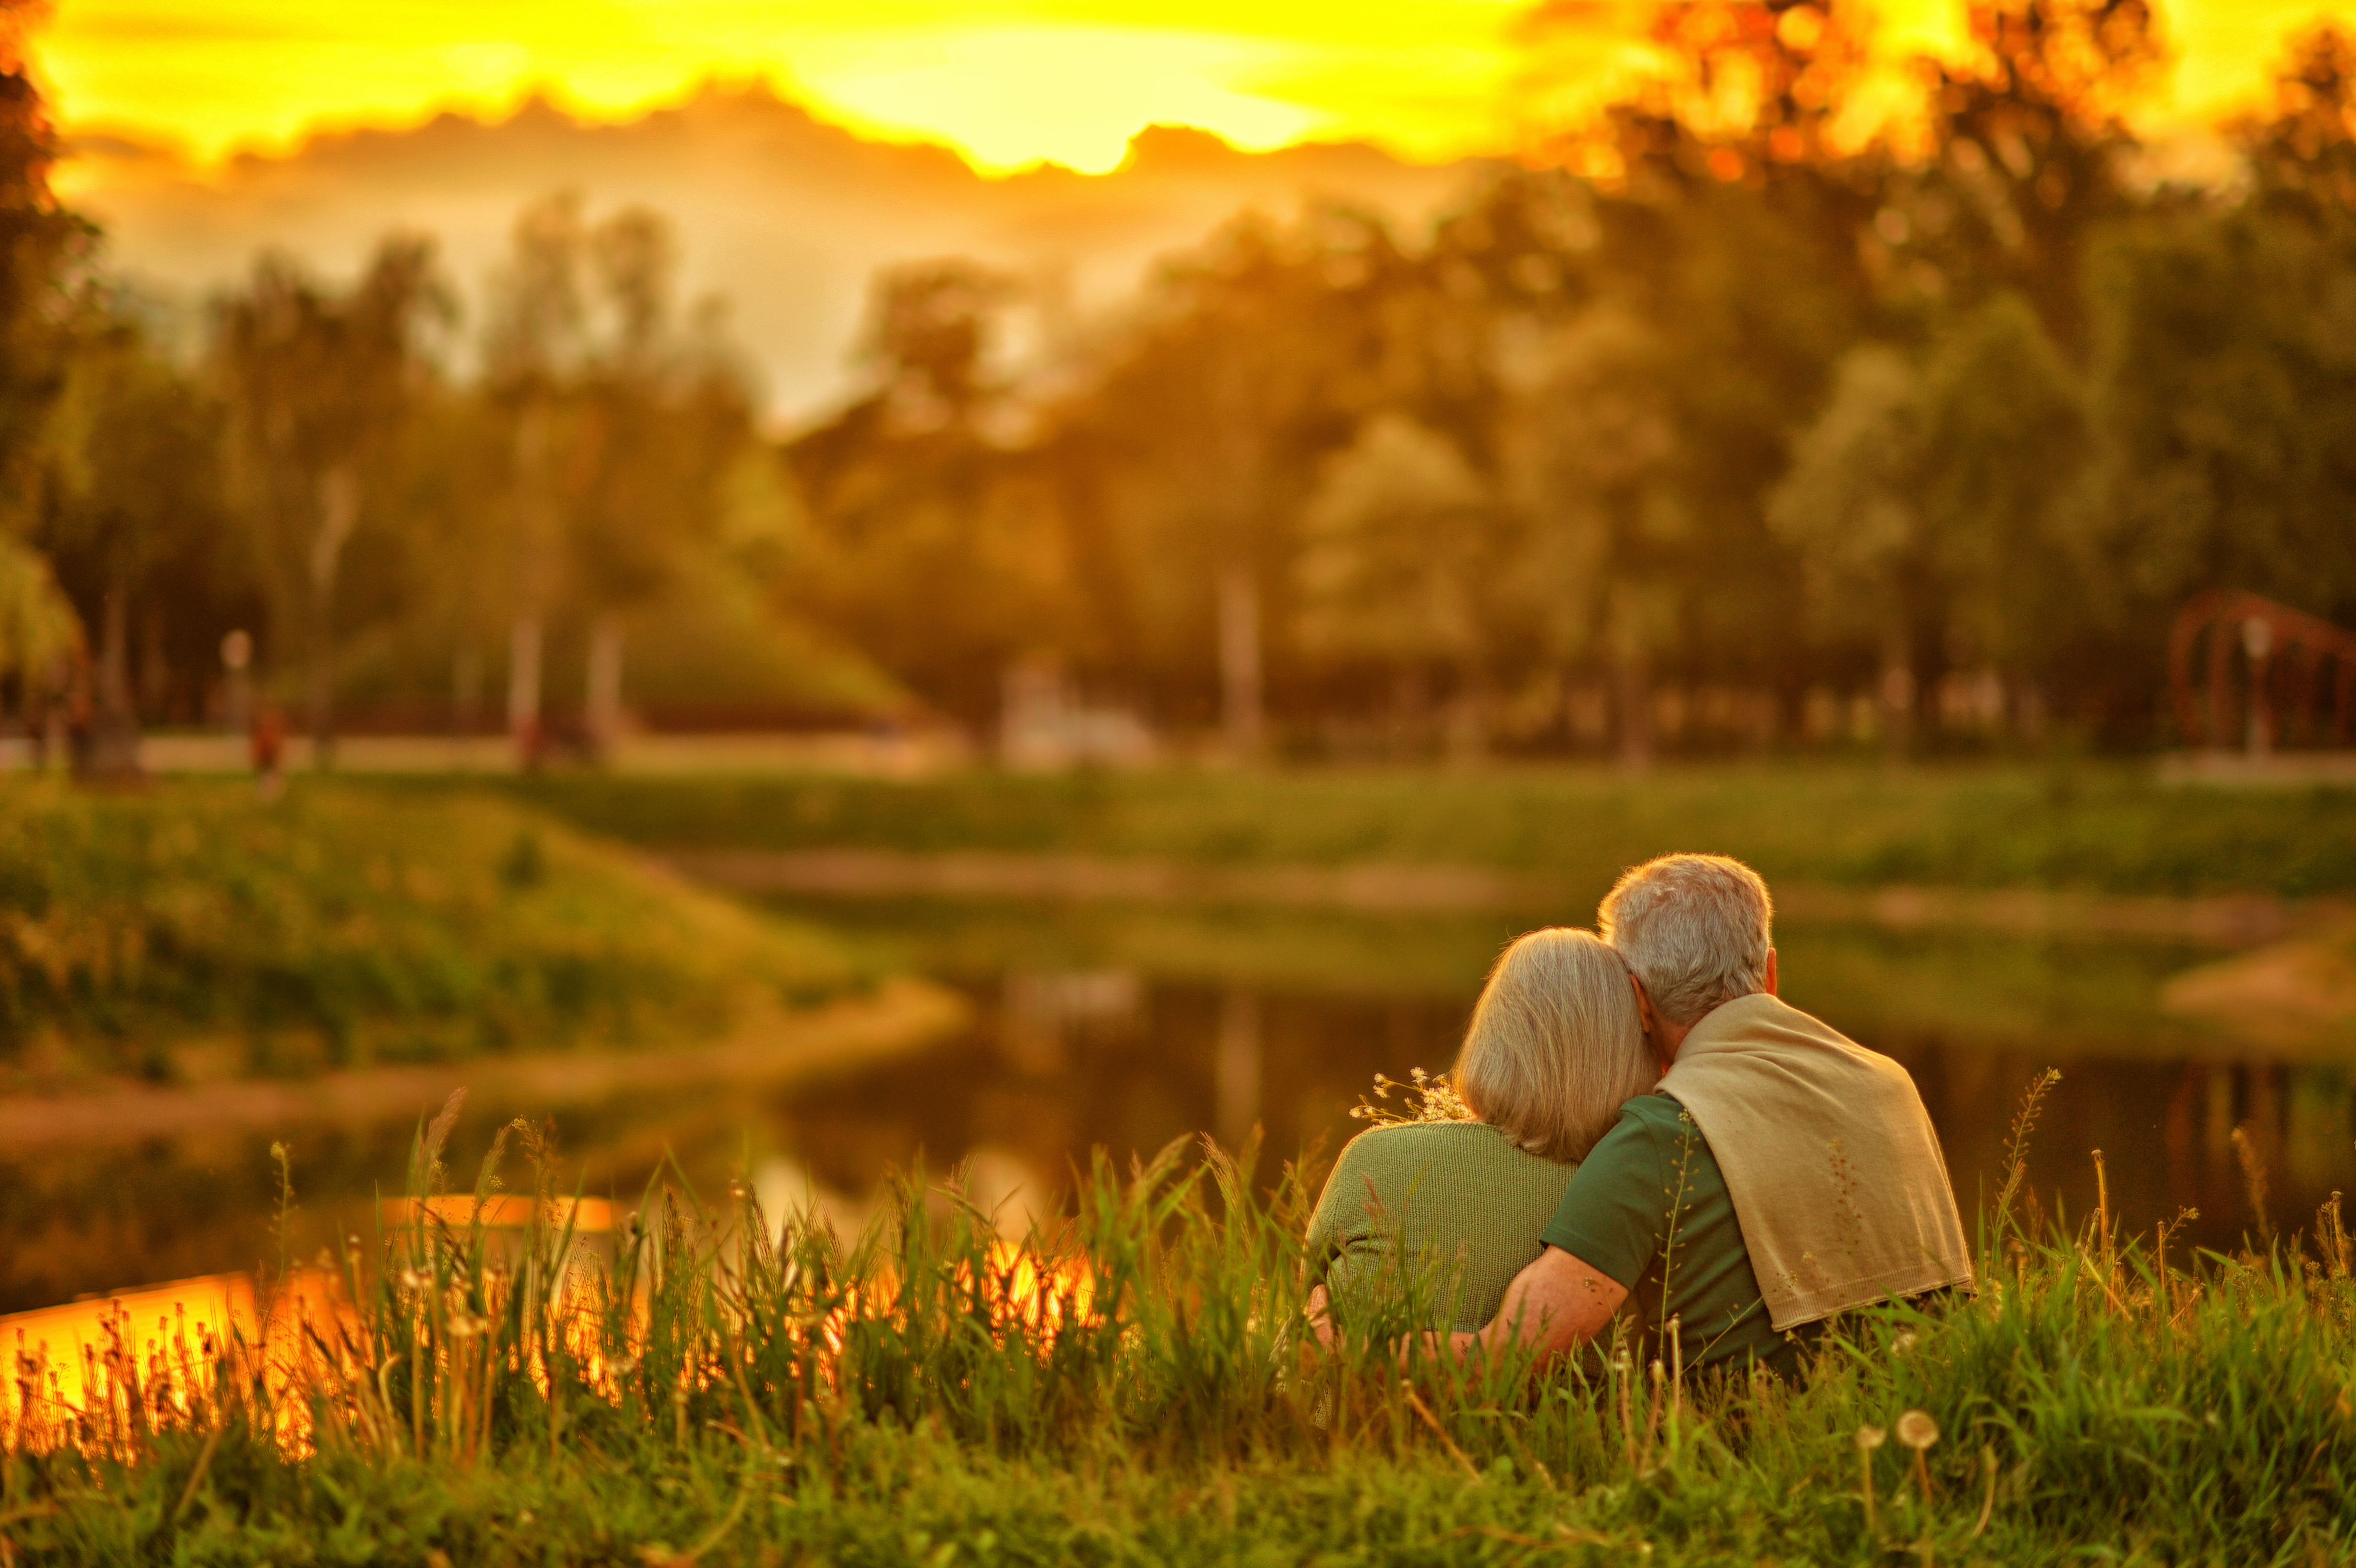 A senior couple in a park | Source: Shutterstock